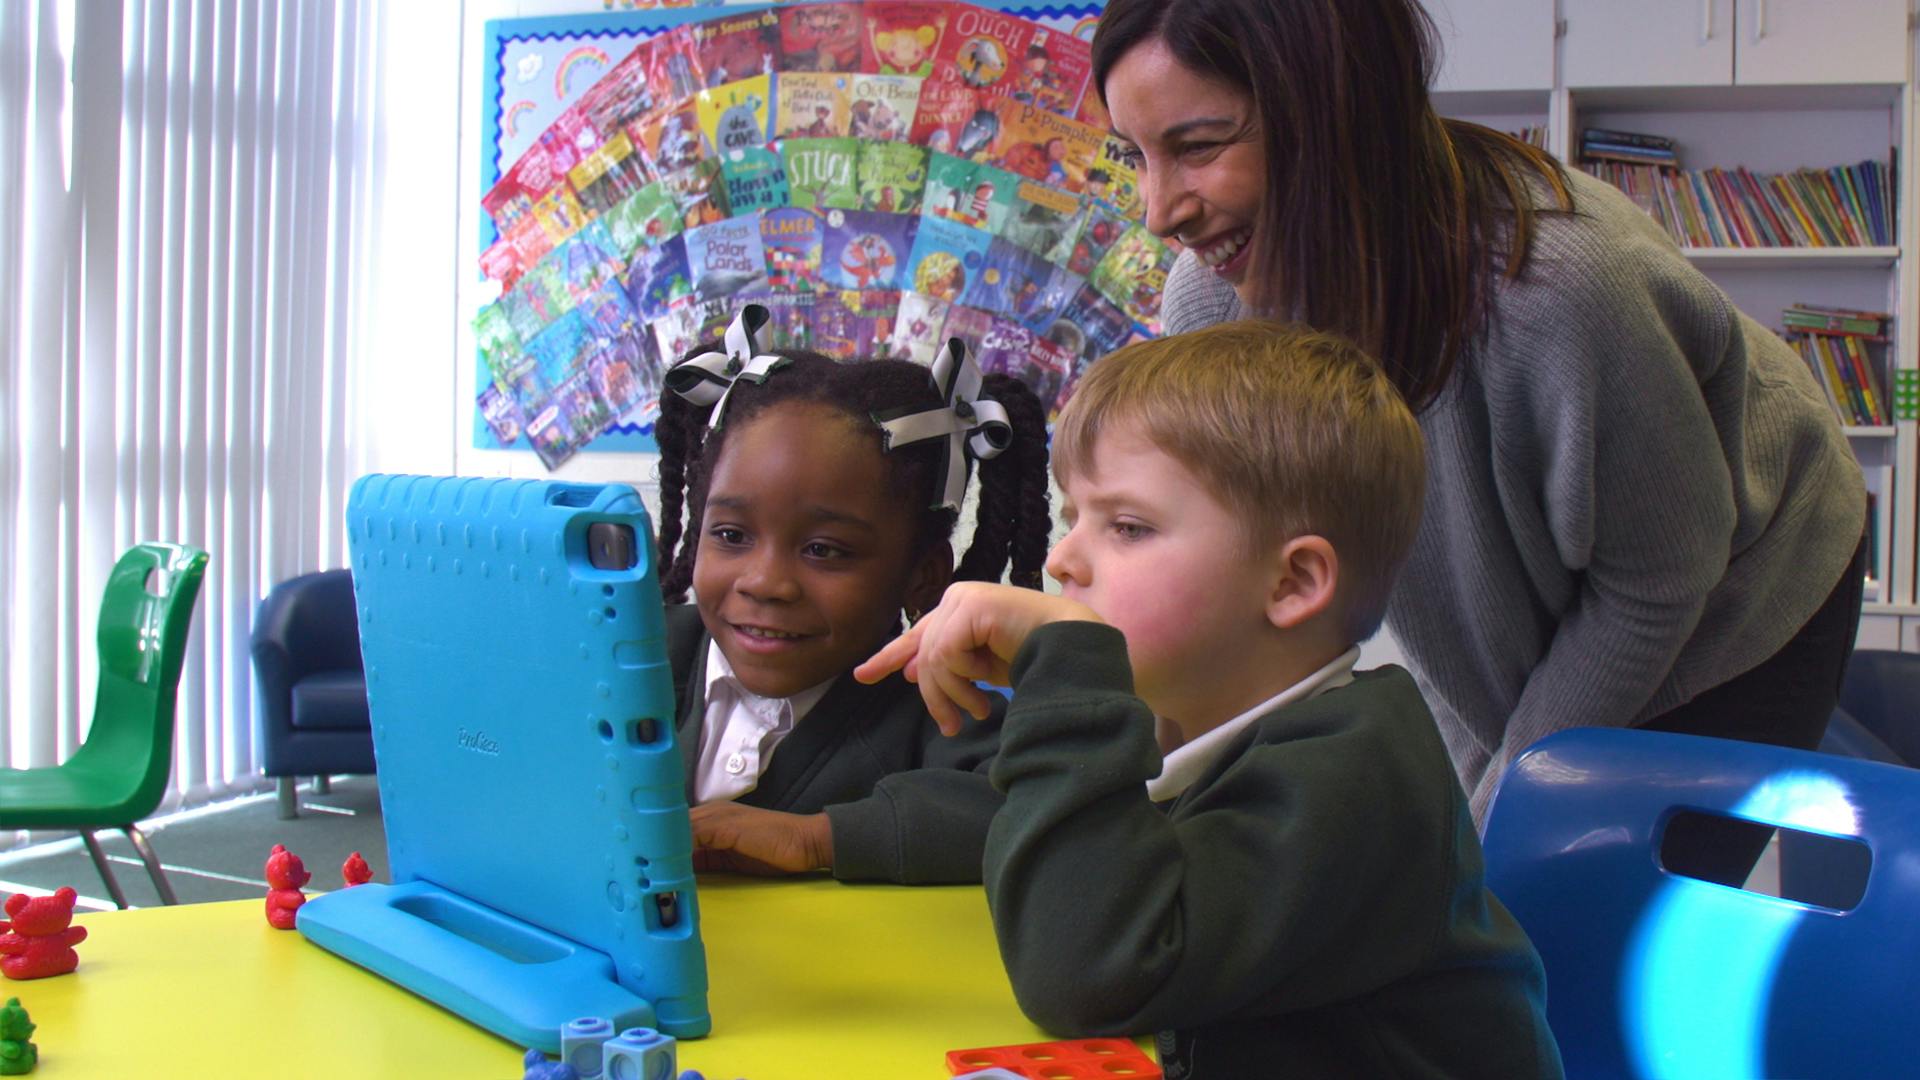 A teacher and pupils enjoy playing Teach Your Monster Number Skills together in a classroom.